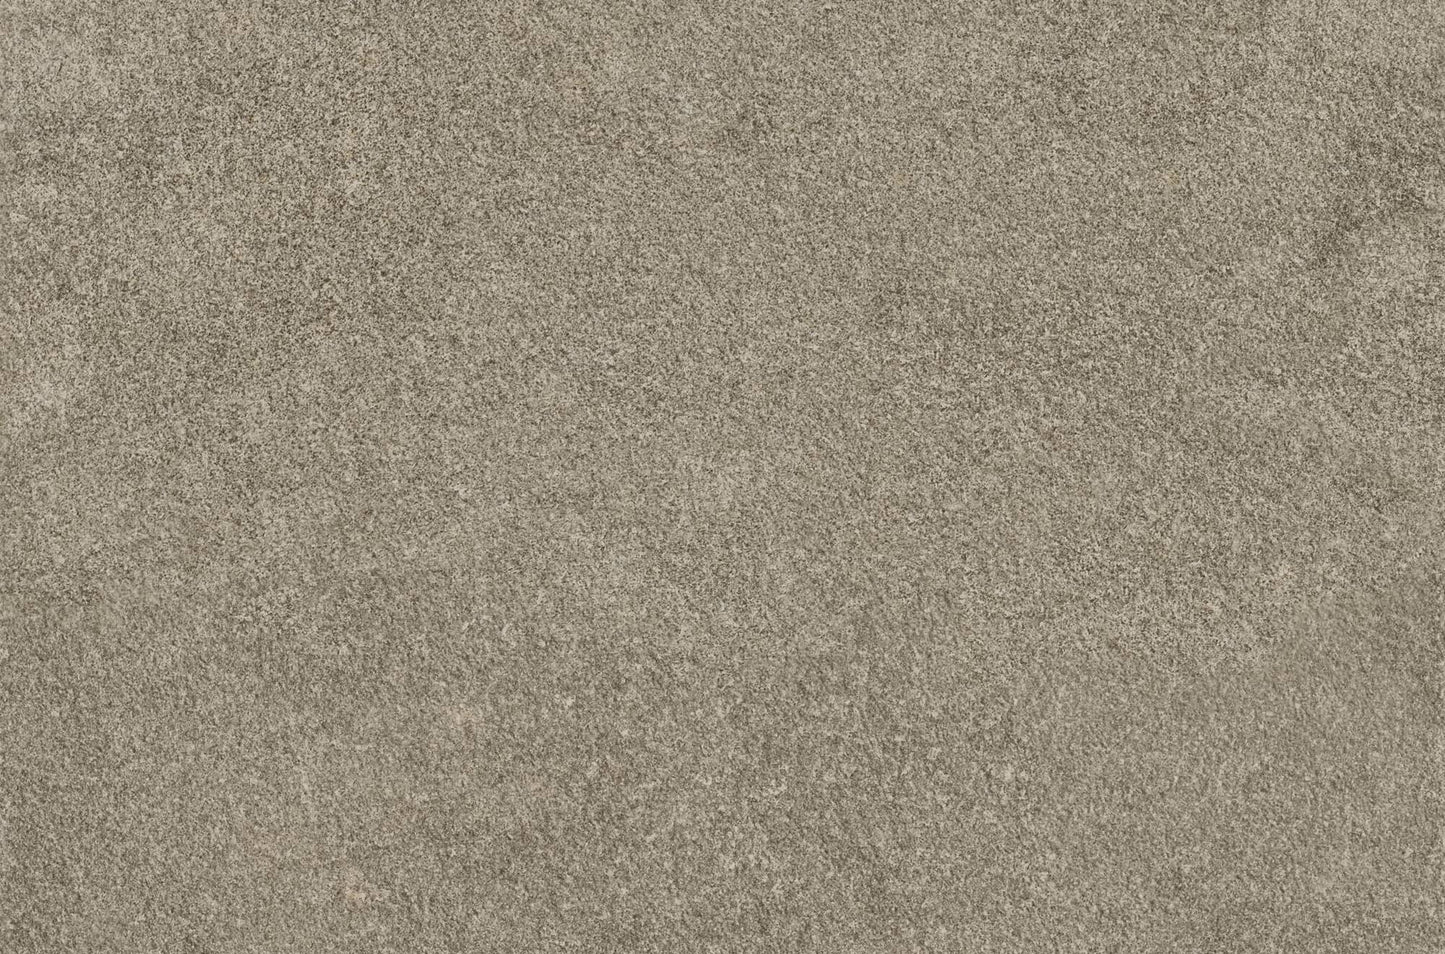 Avenue Grey 20mm Extra Thick Porcelain Tiles